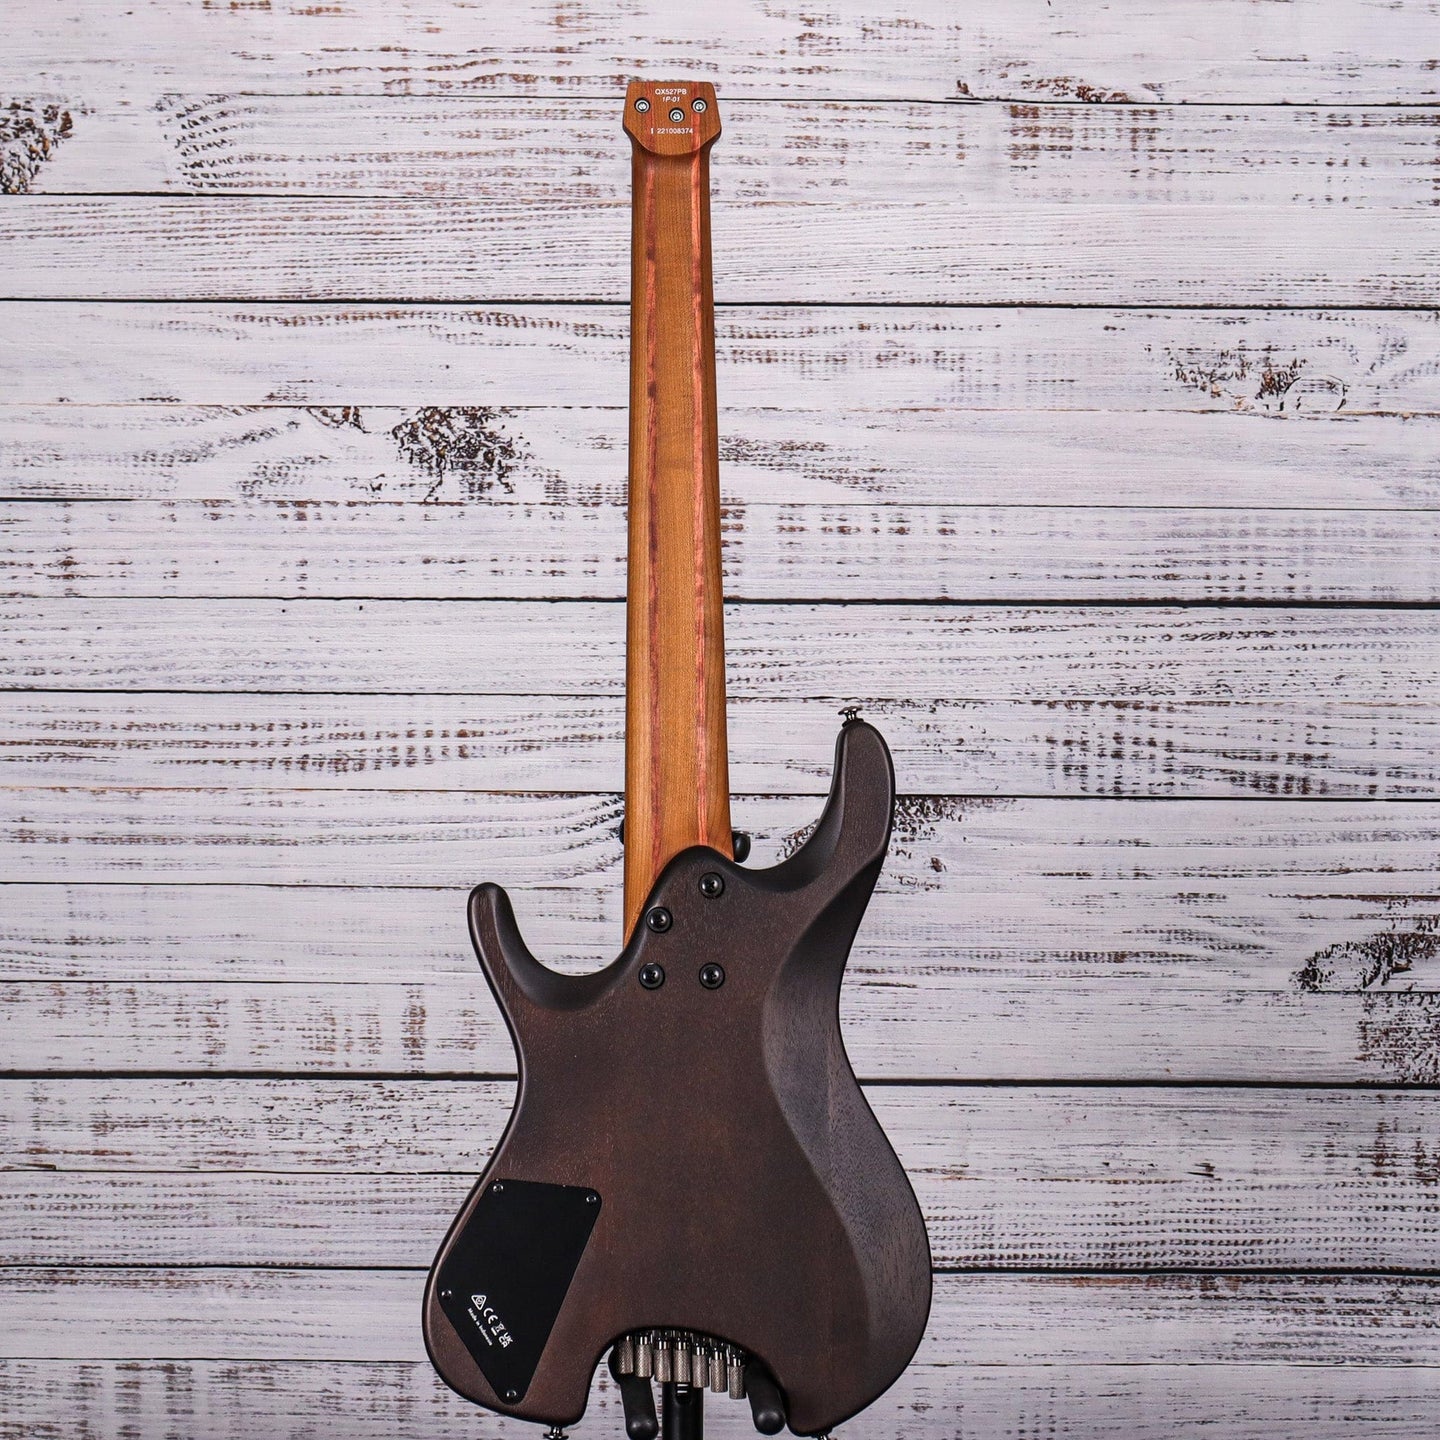 Ibanez Q Standard 7 string Electric Guitar | Antique Brown Stained